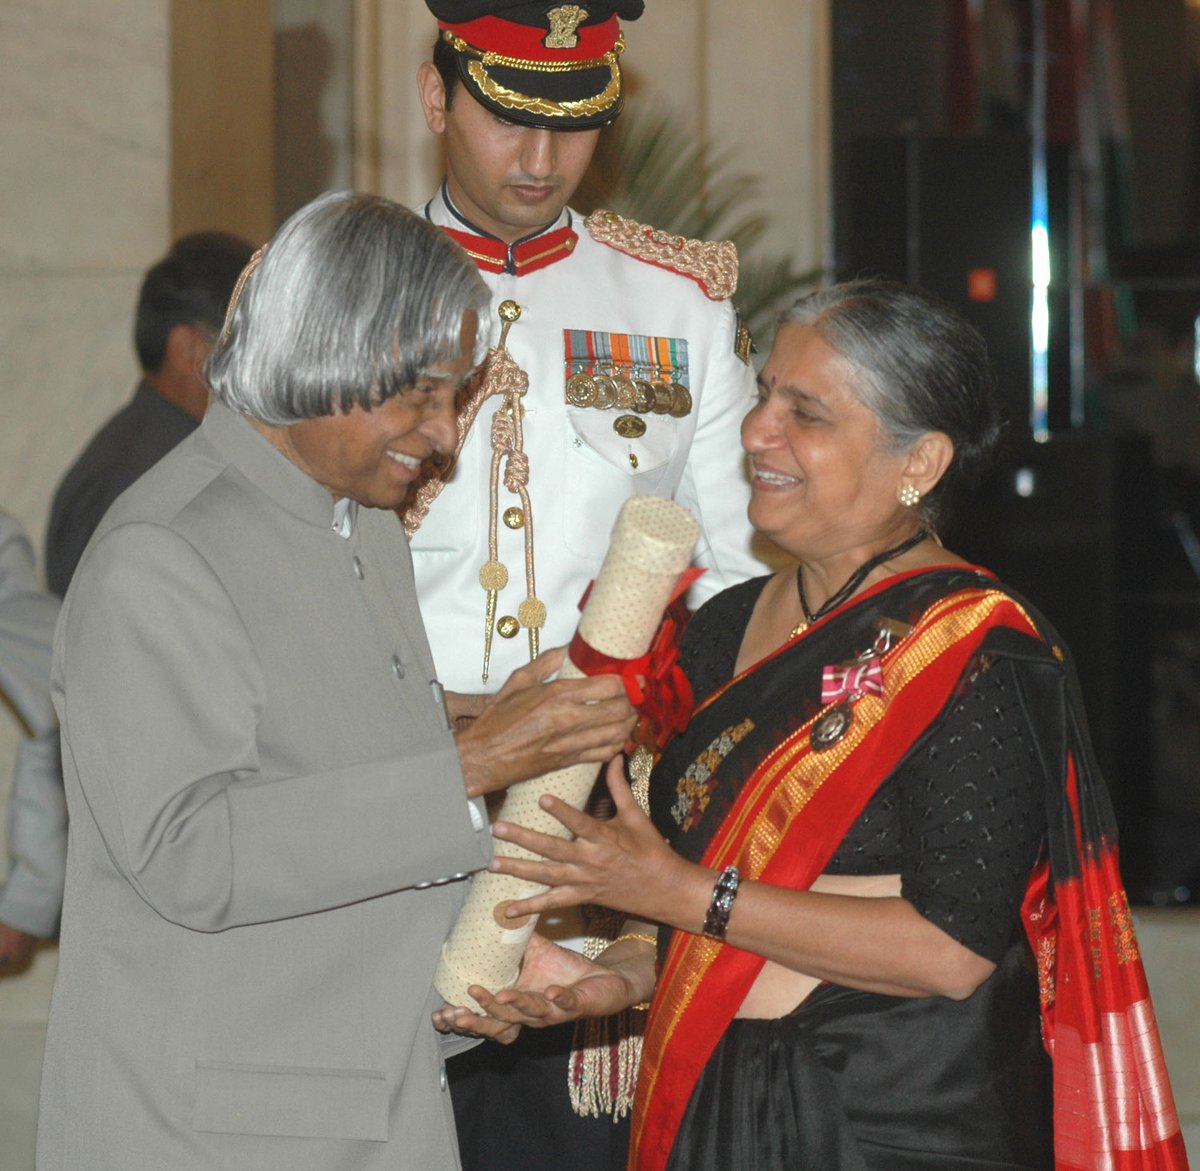 Sudha Murthy has been honoured with awards like Padma Shri(2006), Best Teacher Award(1995), R.K.Narayan Award for Literature(2006), Attimabbe Award for her technical book on computers, Award for Excellent Social Service by Rotary South-Hubli and many more.